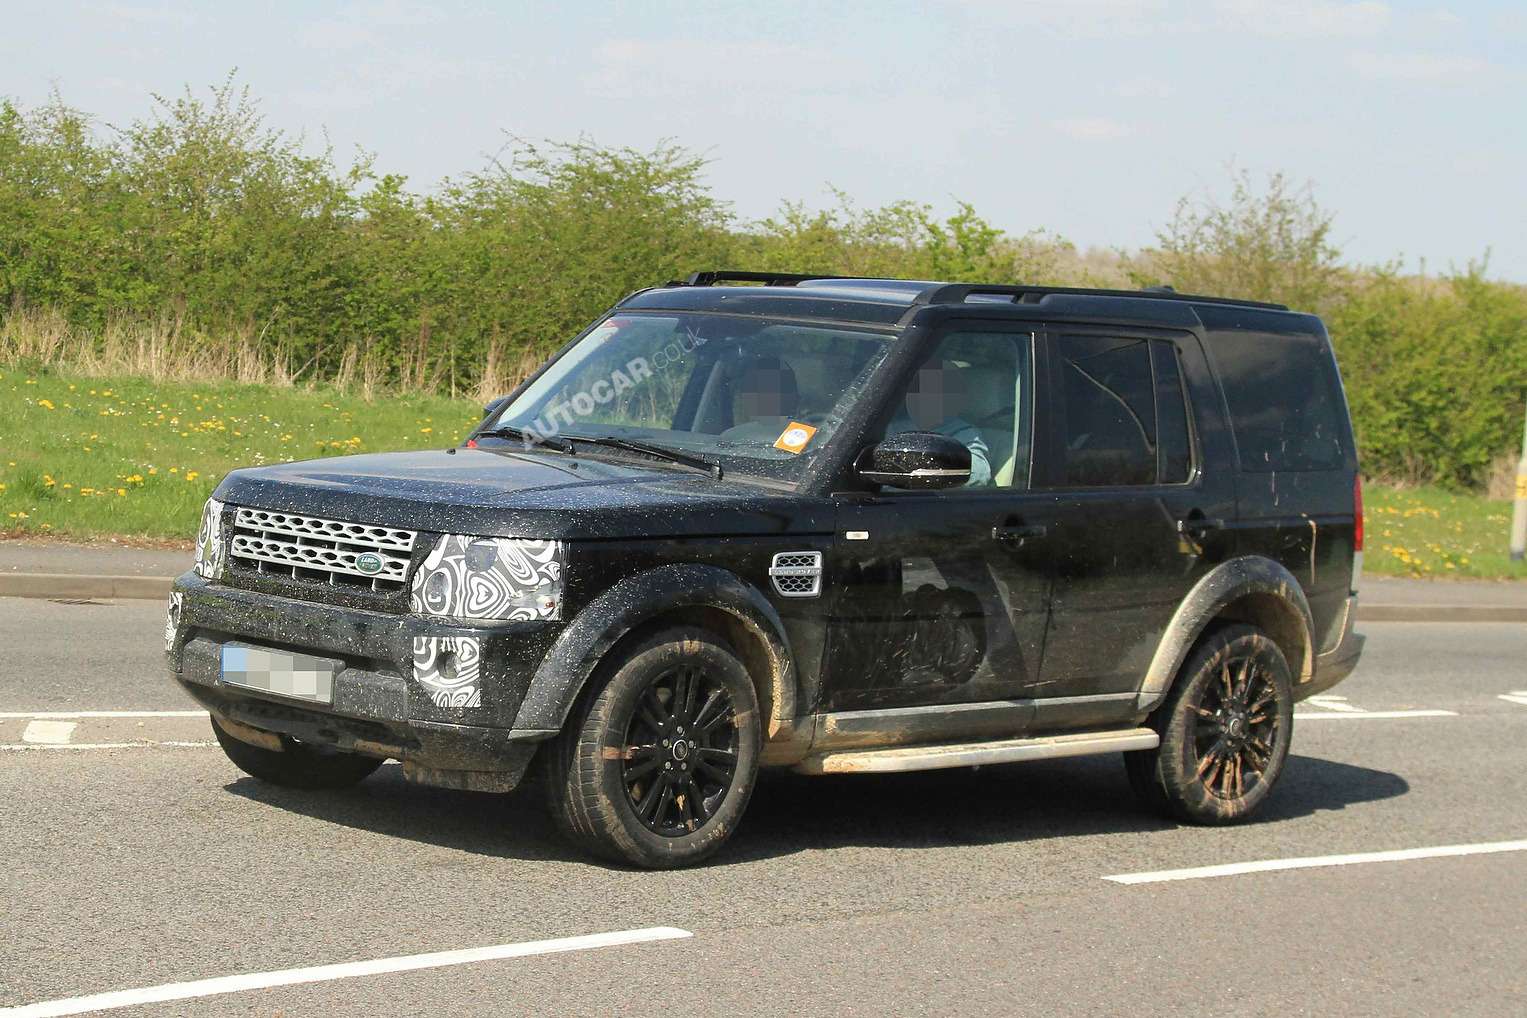 Дискавери 16. Land Rover Discovery 3. Land Rover Discovery 3 новый. Land Rover Discovery 4 2014. Дискавери 4 новый.